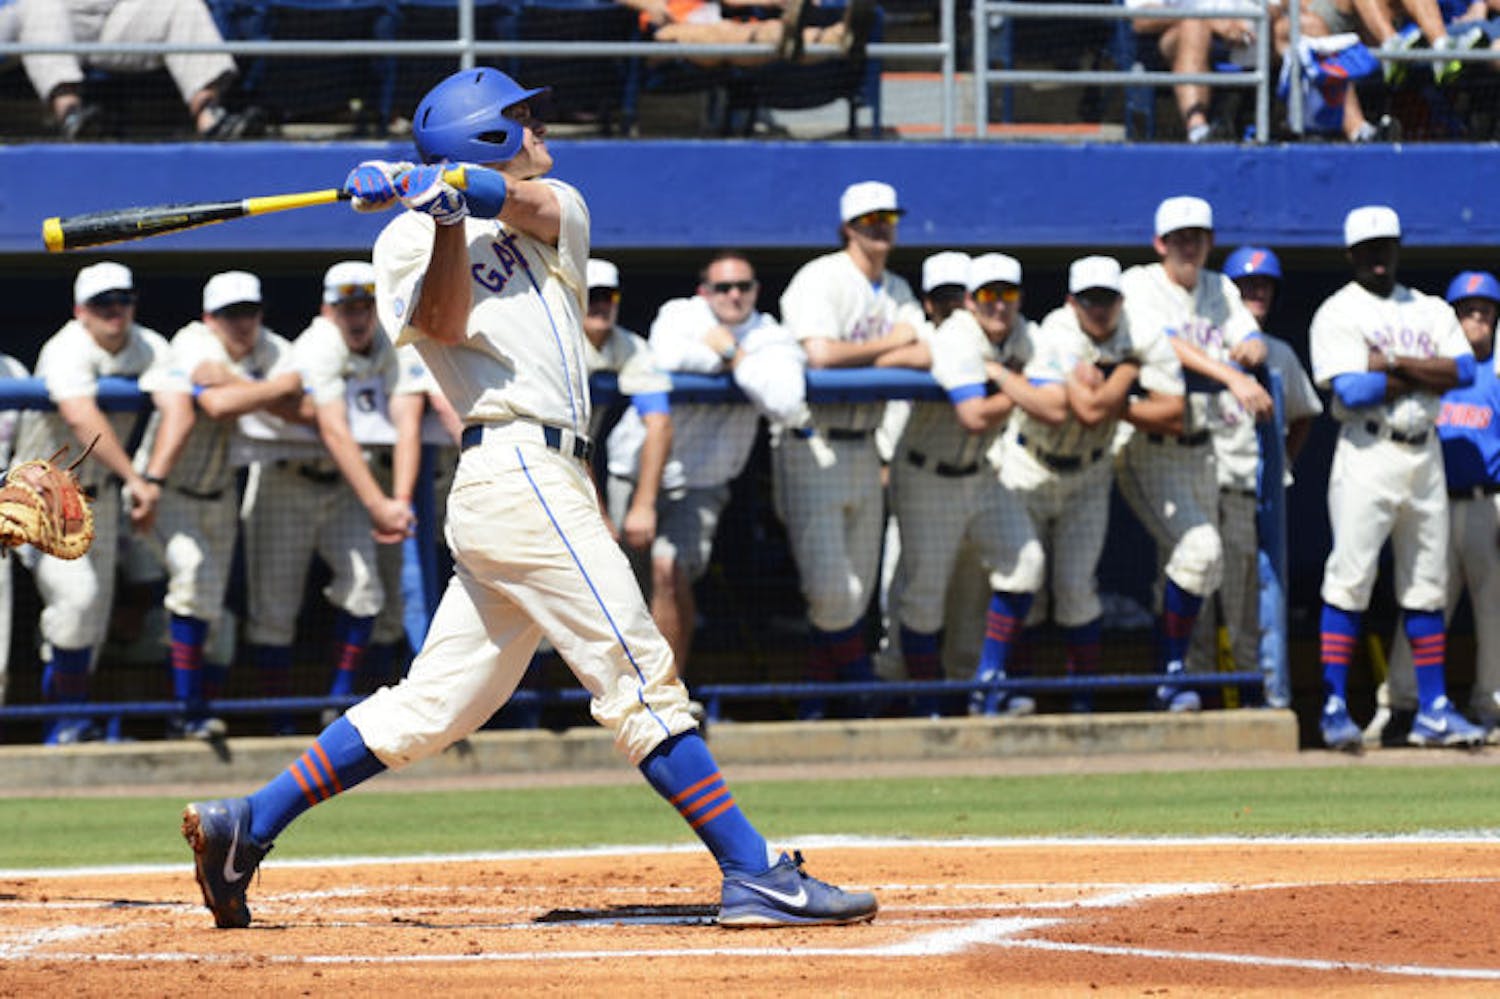 Sophomore catcher Taylor Gushue swings Florida’s 14-5 win against South Carolina on April 12 at McKethan Stadium. Gushue leads the Gators with 30 RBI.